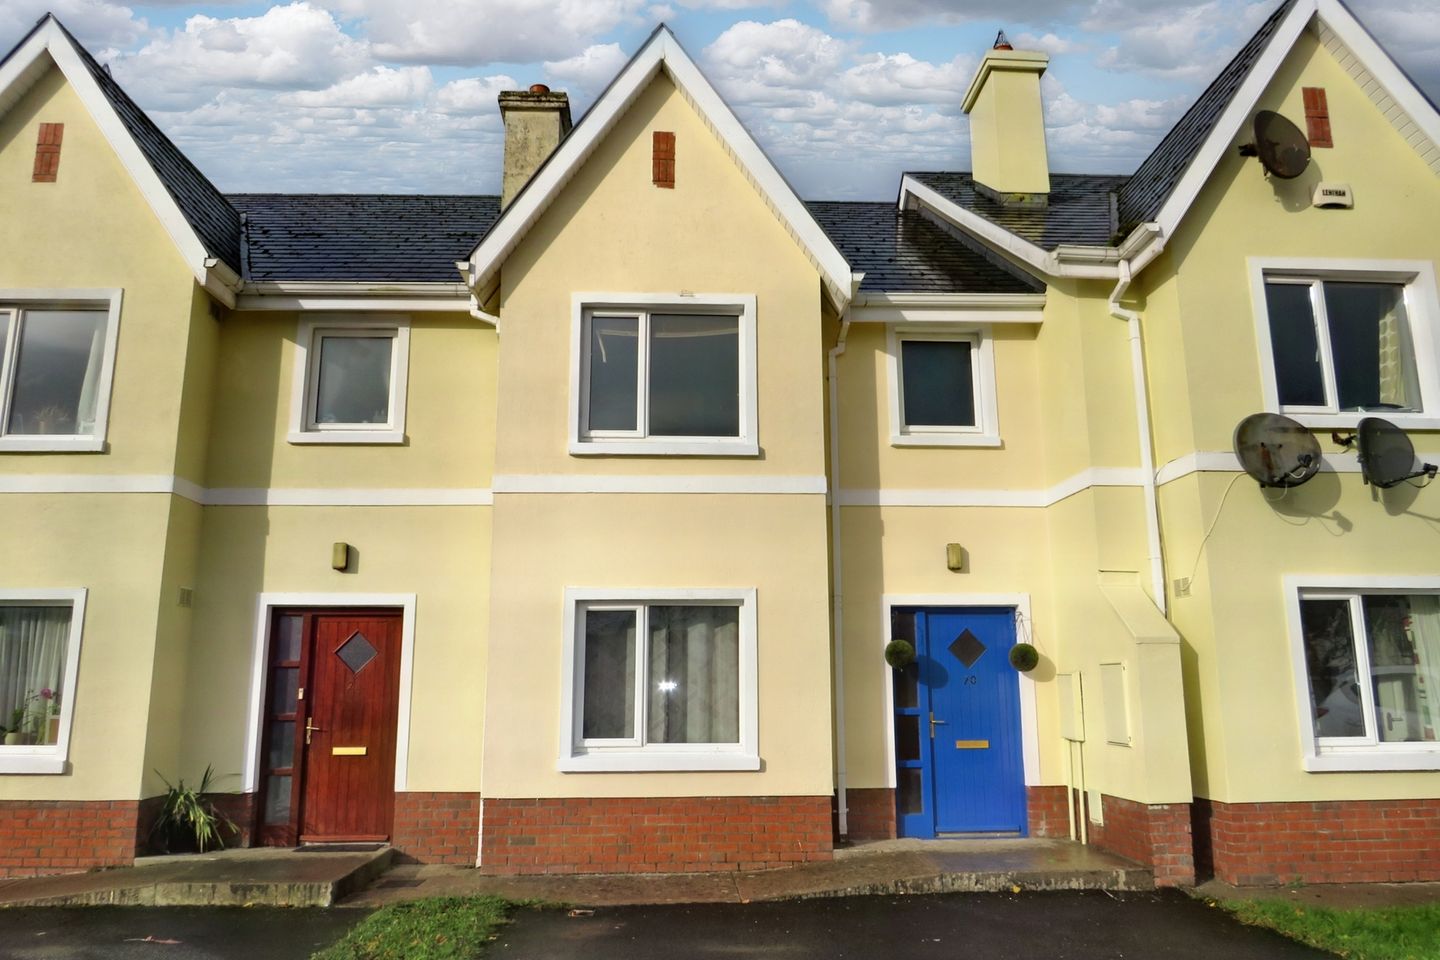 20 Orchard Heights, Charleville, Co. Cork, P56HW97